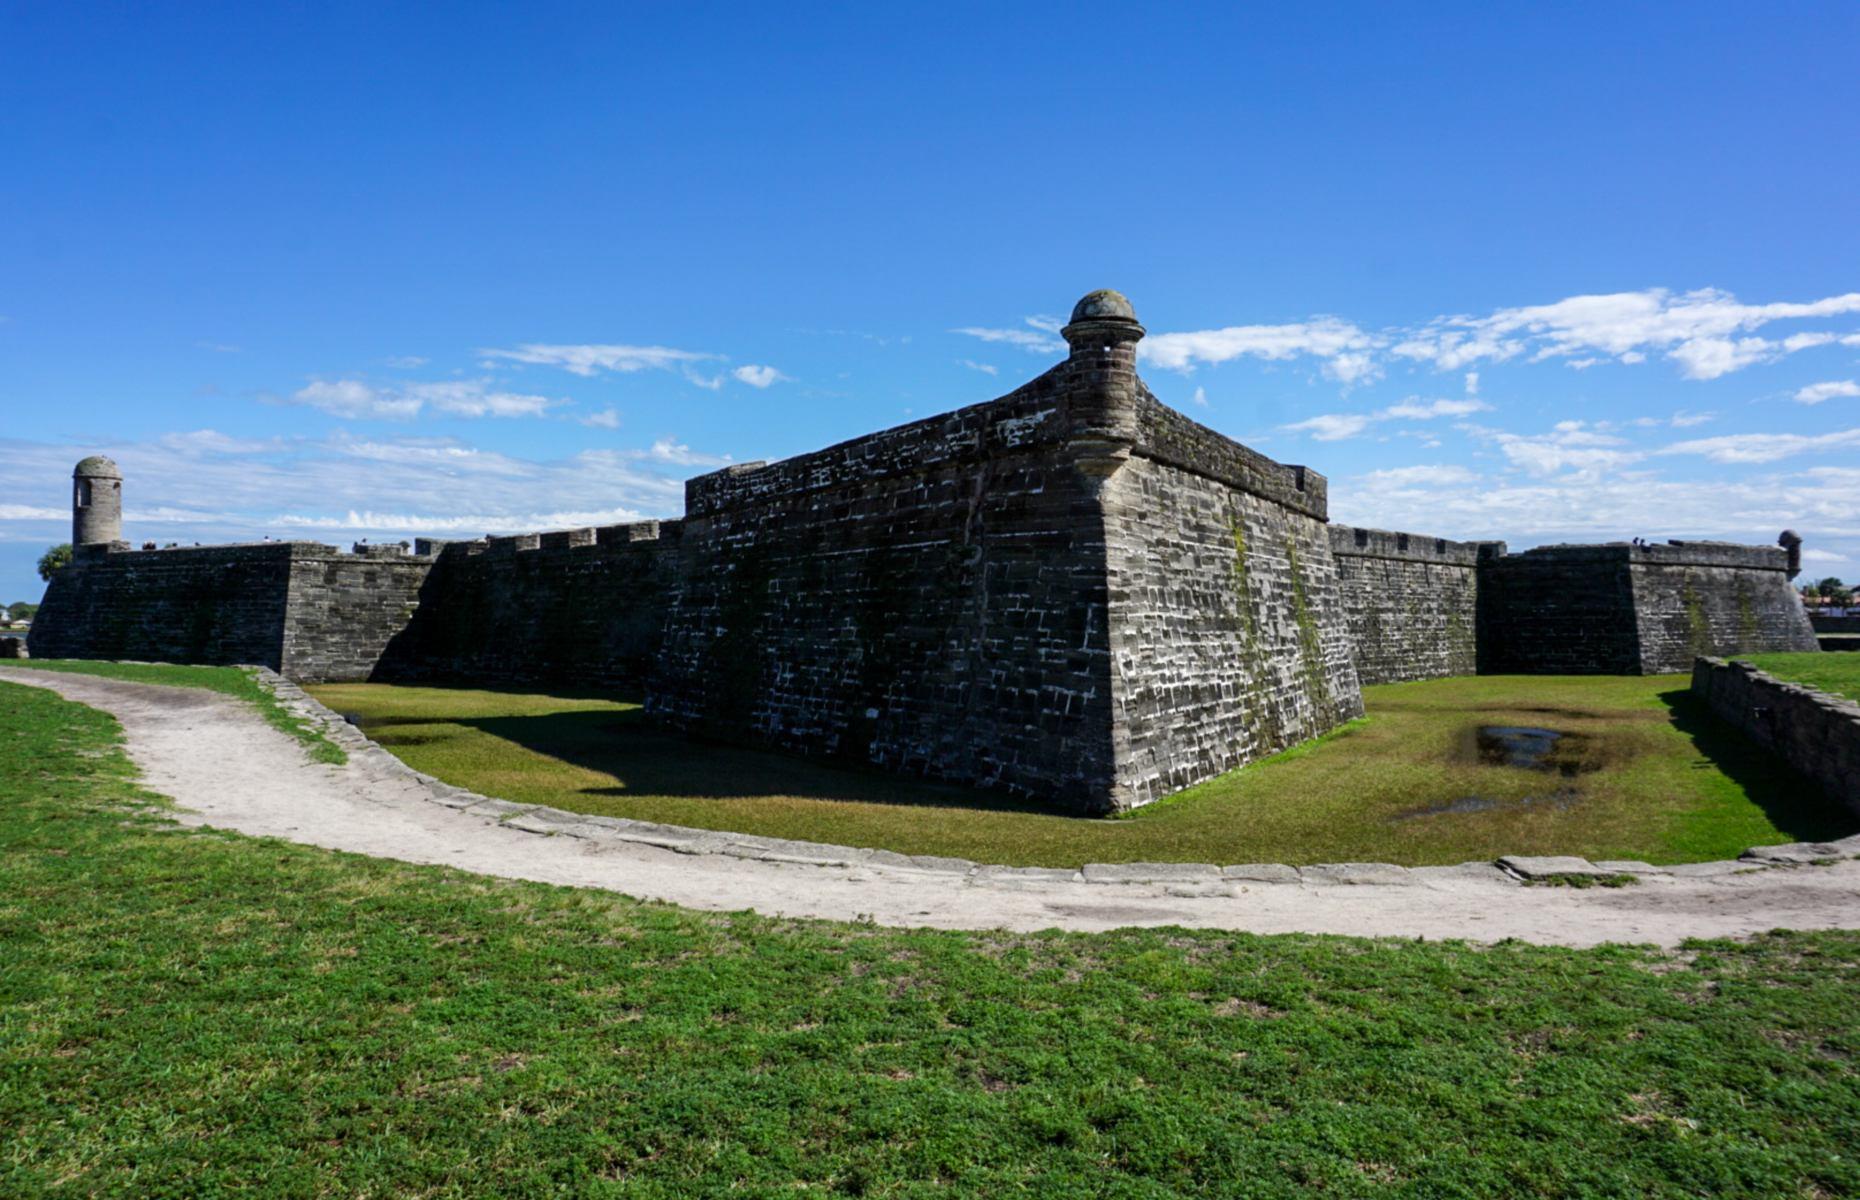 <p>A whole half-century before the pilgrims arrived at Plymouth Harbor, Spanish colonists led by Don Pedro Menéndez de Avilés landed on Florida’s shores in 1565, and named their new settlement St. Augustine. Although French Huguenots (Protestants) had already established a fledgling presence in the area the year before, this Spanish fort and colony continued to grow. It’s now known as the oldest continuously occupied place of European (and African American) origin in the country.</p>